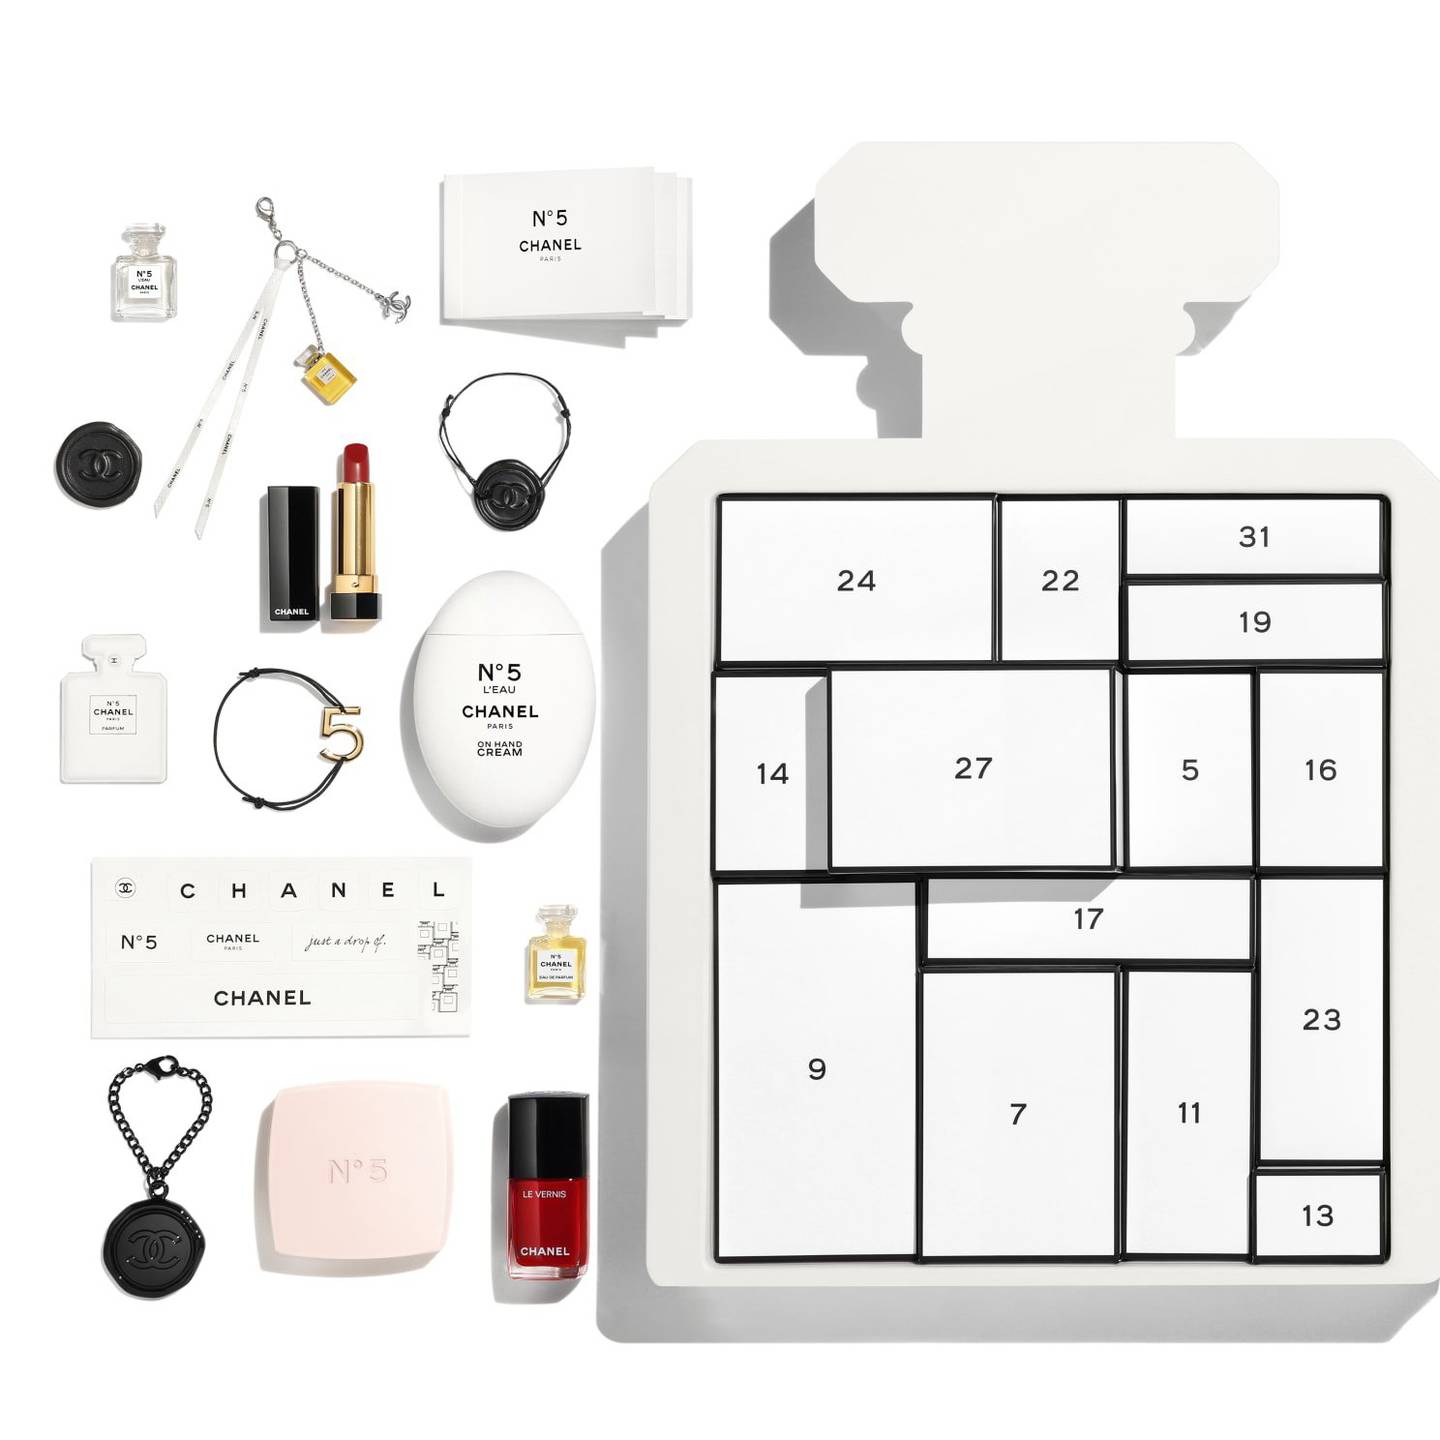 Some of the contents of the Chanel advent calendar. Photo Chanel